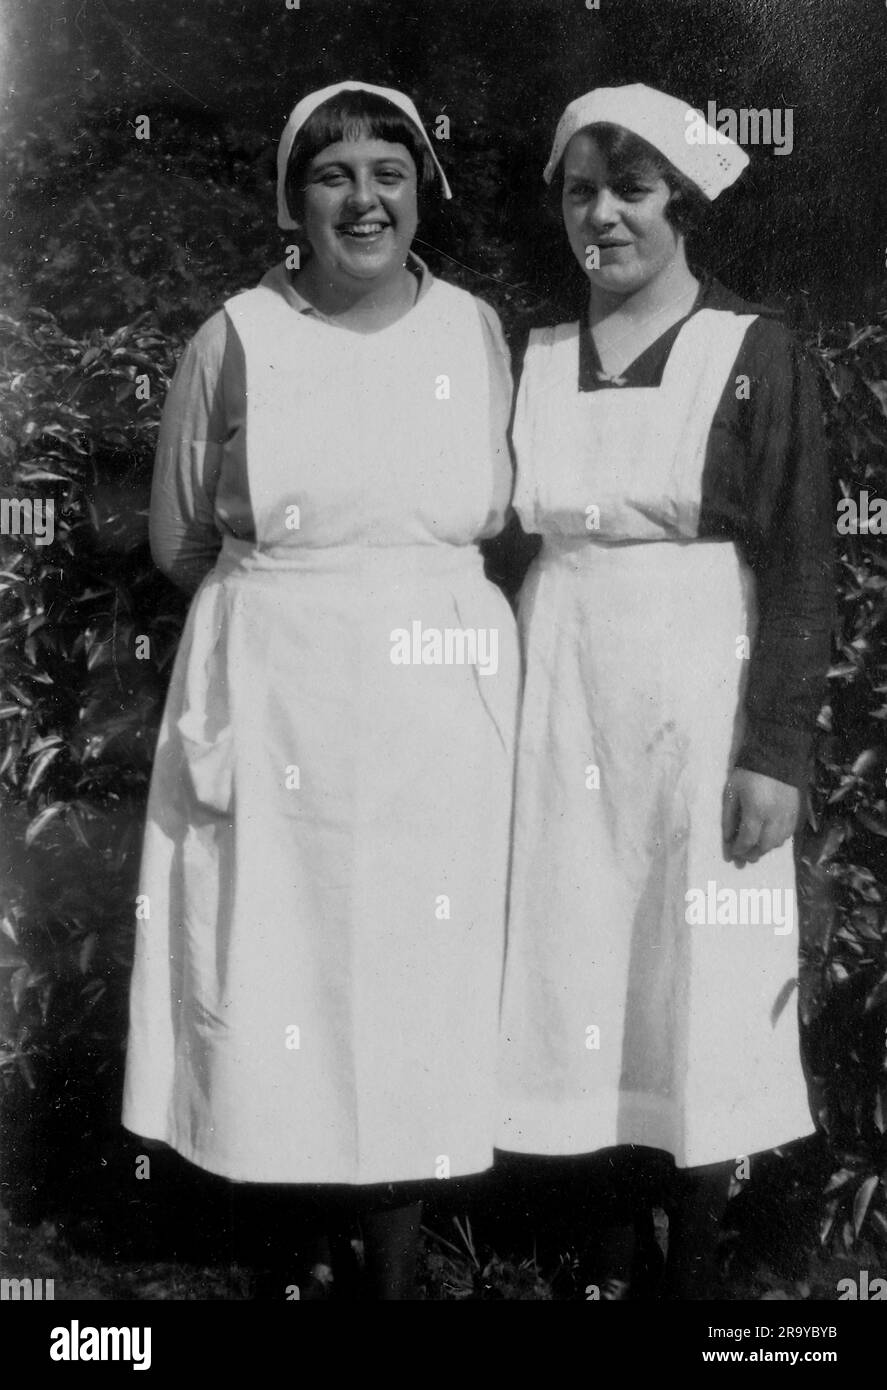 Portrait picture of two nurses in uniform. Photo from a family album of snapshot images mainly taken in the UK, during the 1920s. The family lived in Witley, Surrey, and had some links to the military. Stock Photo